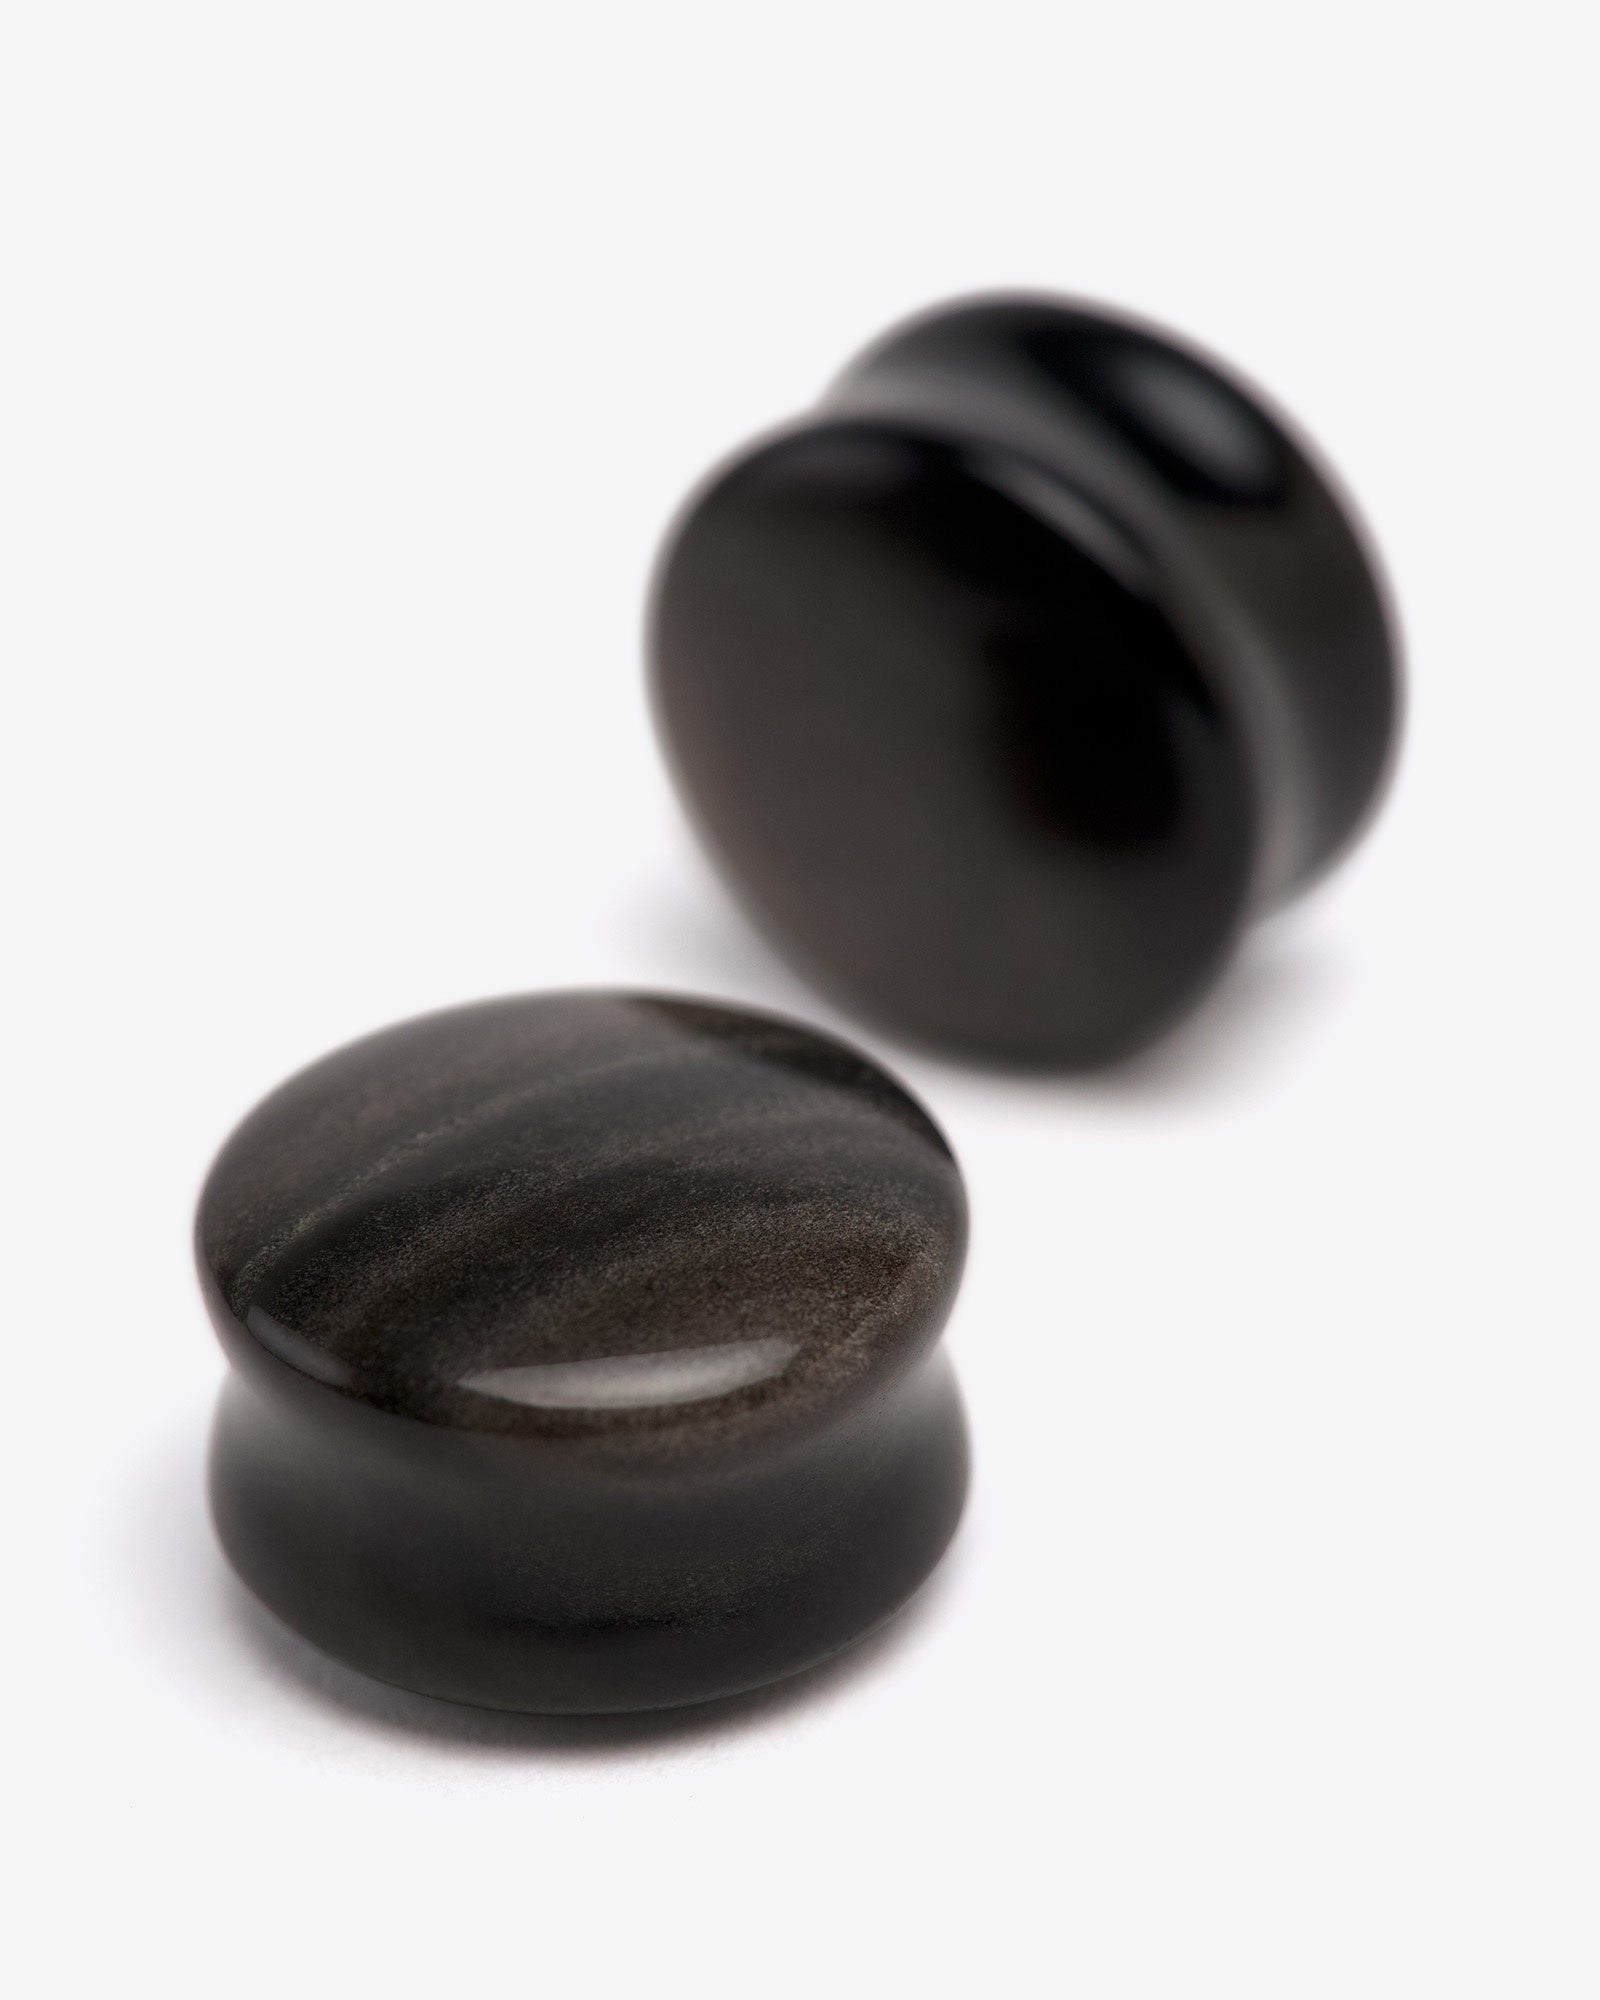 Silver Obsidian Round Plugs - Plugs - Ask and Embla